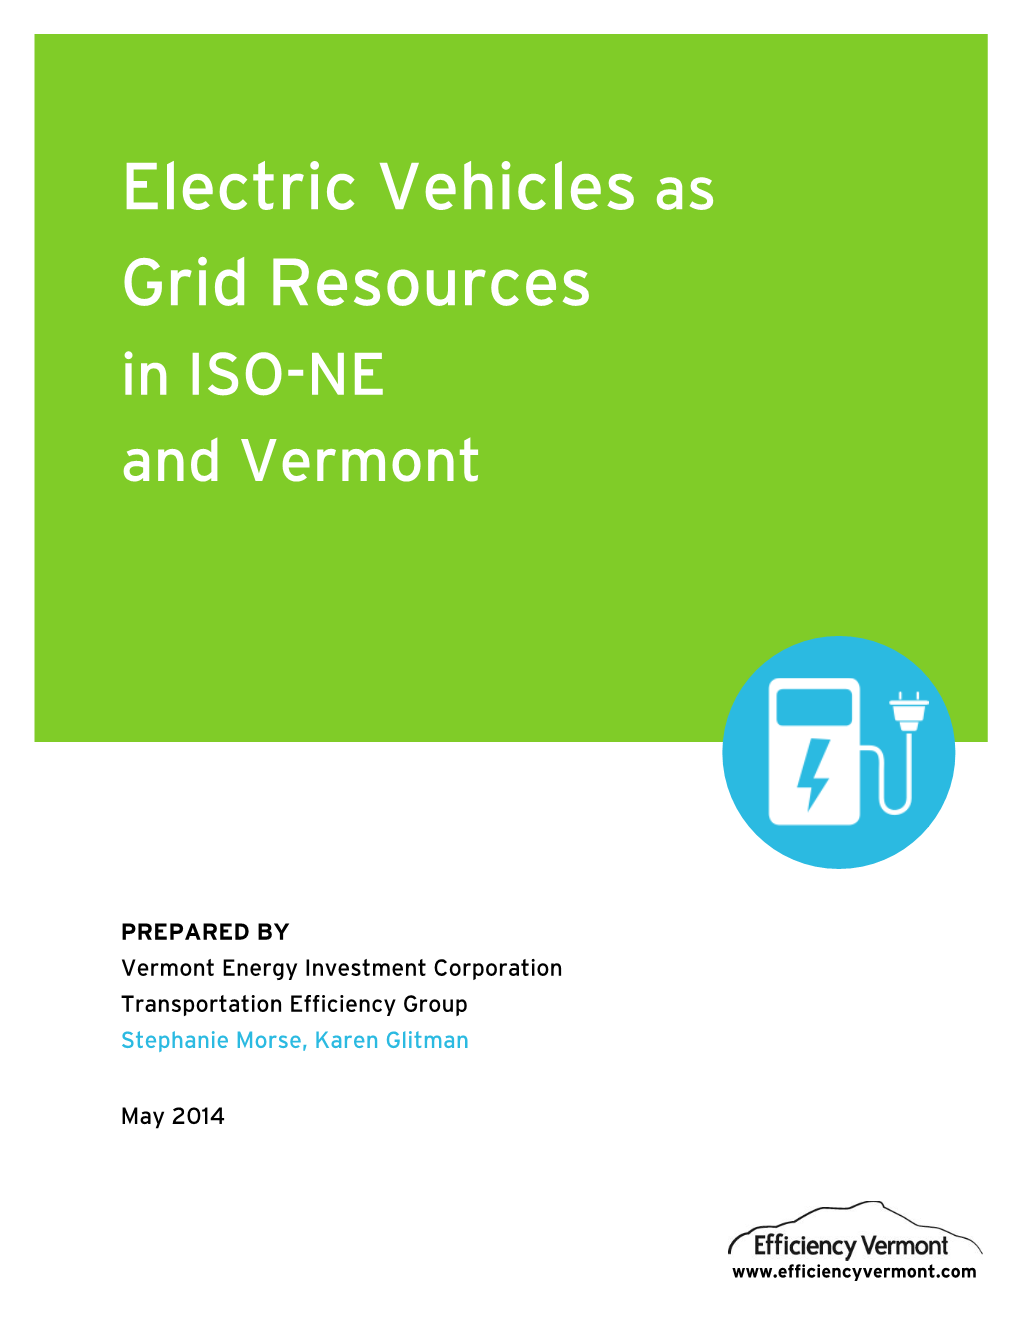 Electric Vehicles As Grid Resources in ISO-NE and Vermont April 2014